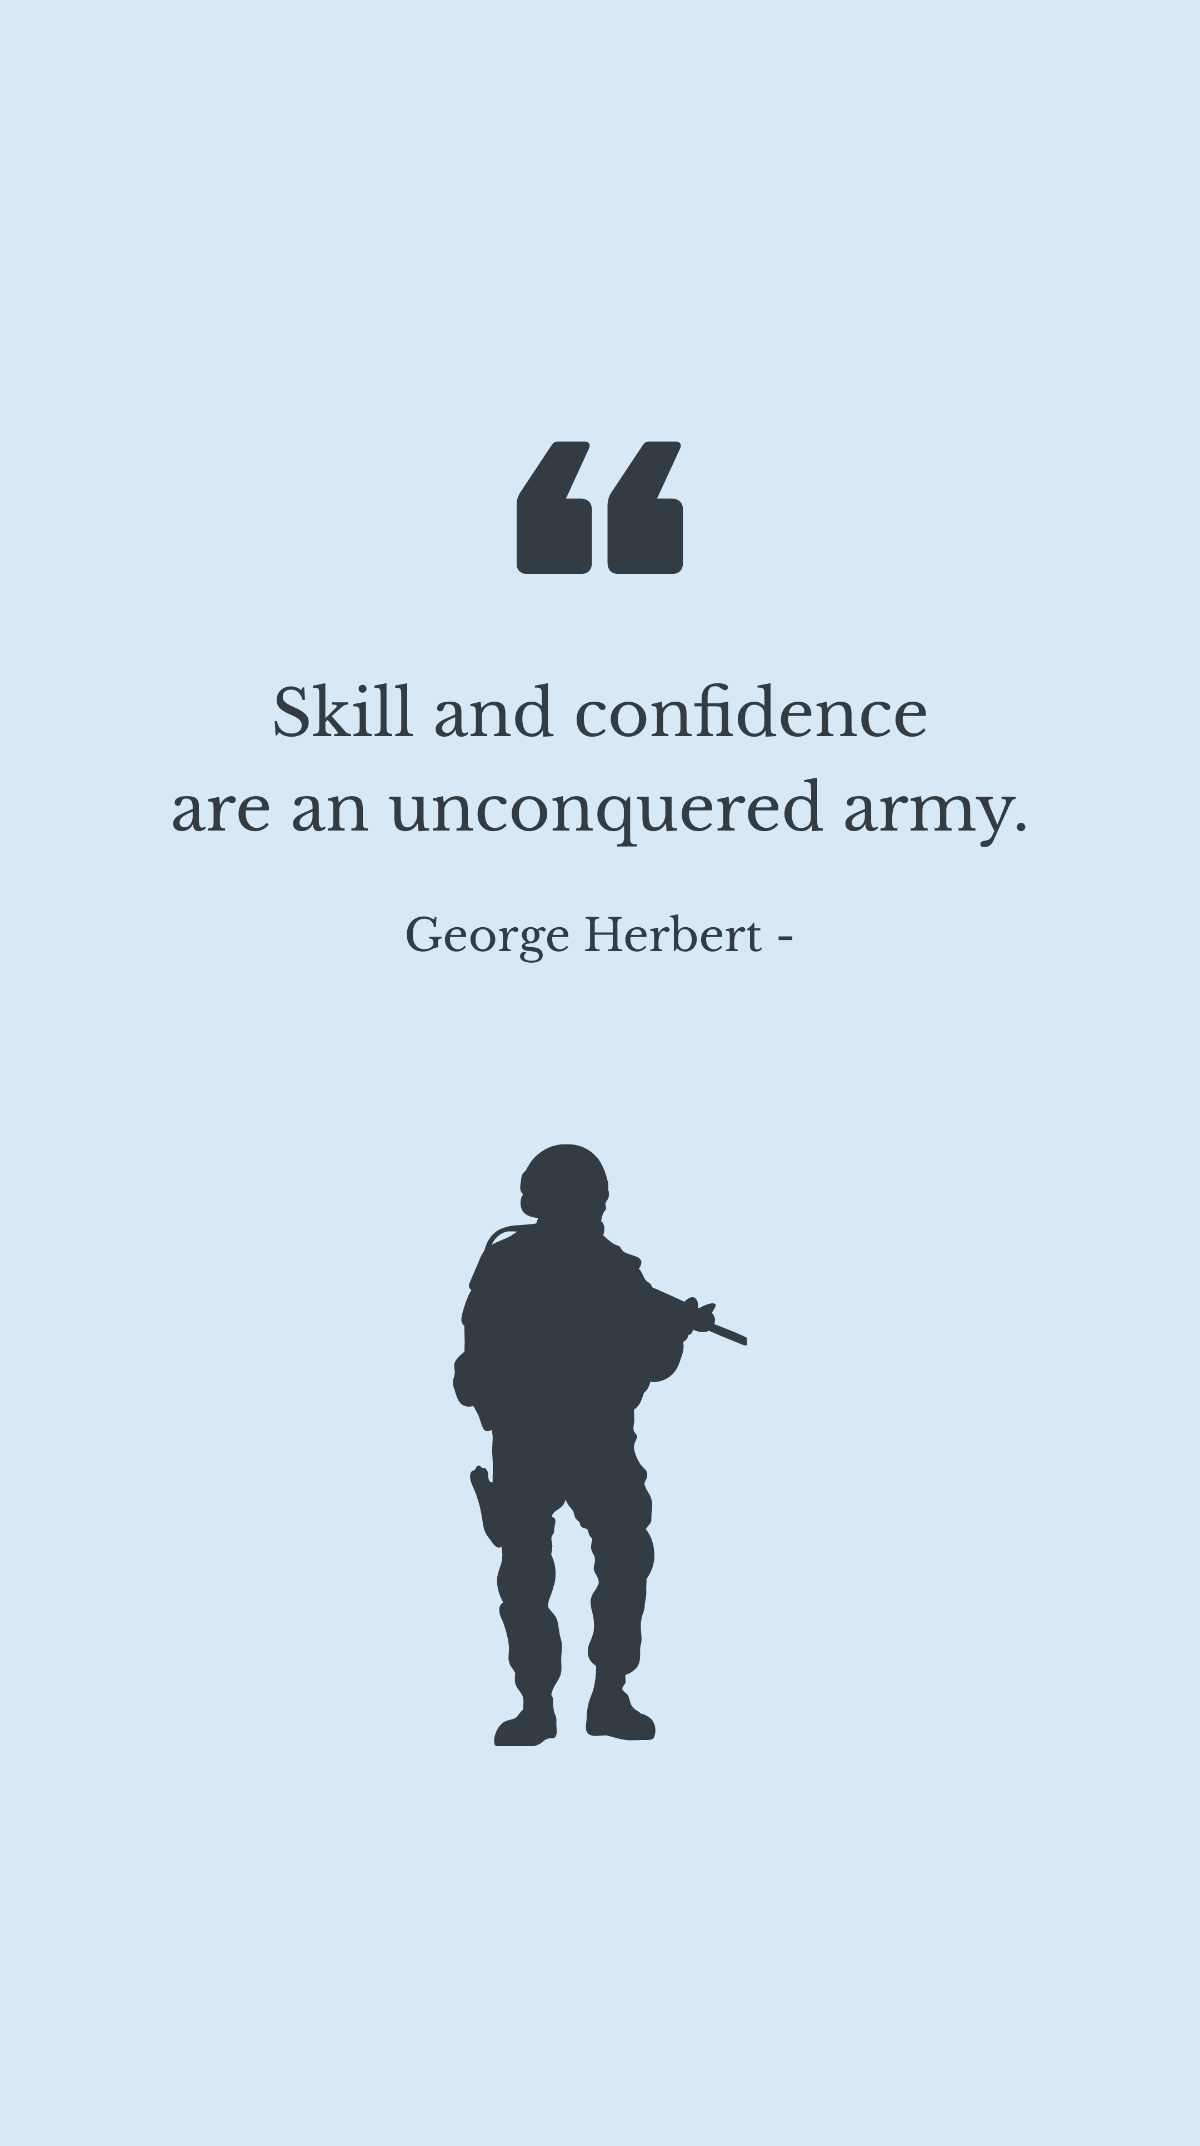 George Herbert - Skill and confidence are an unconquered army. Template